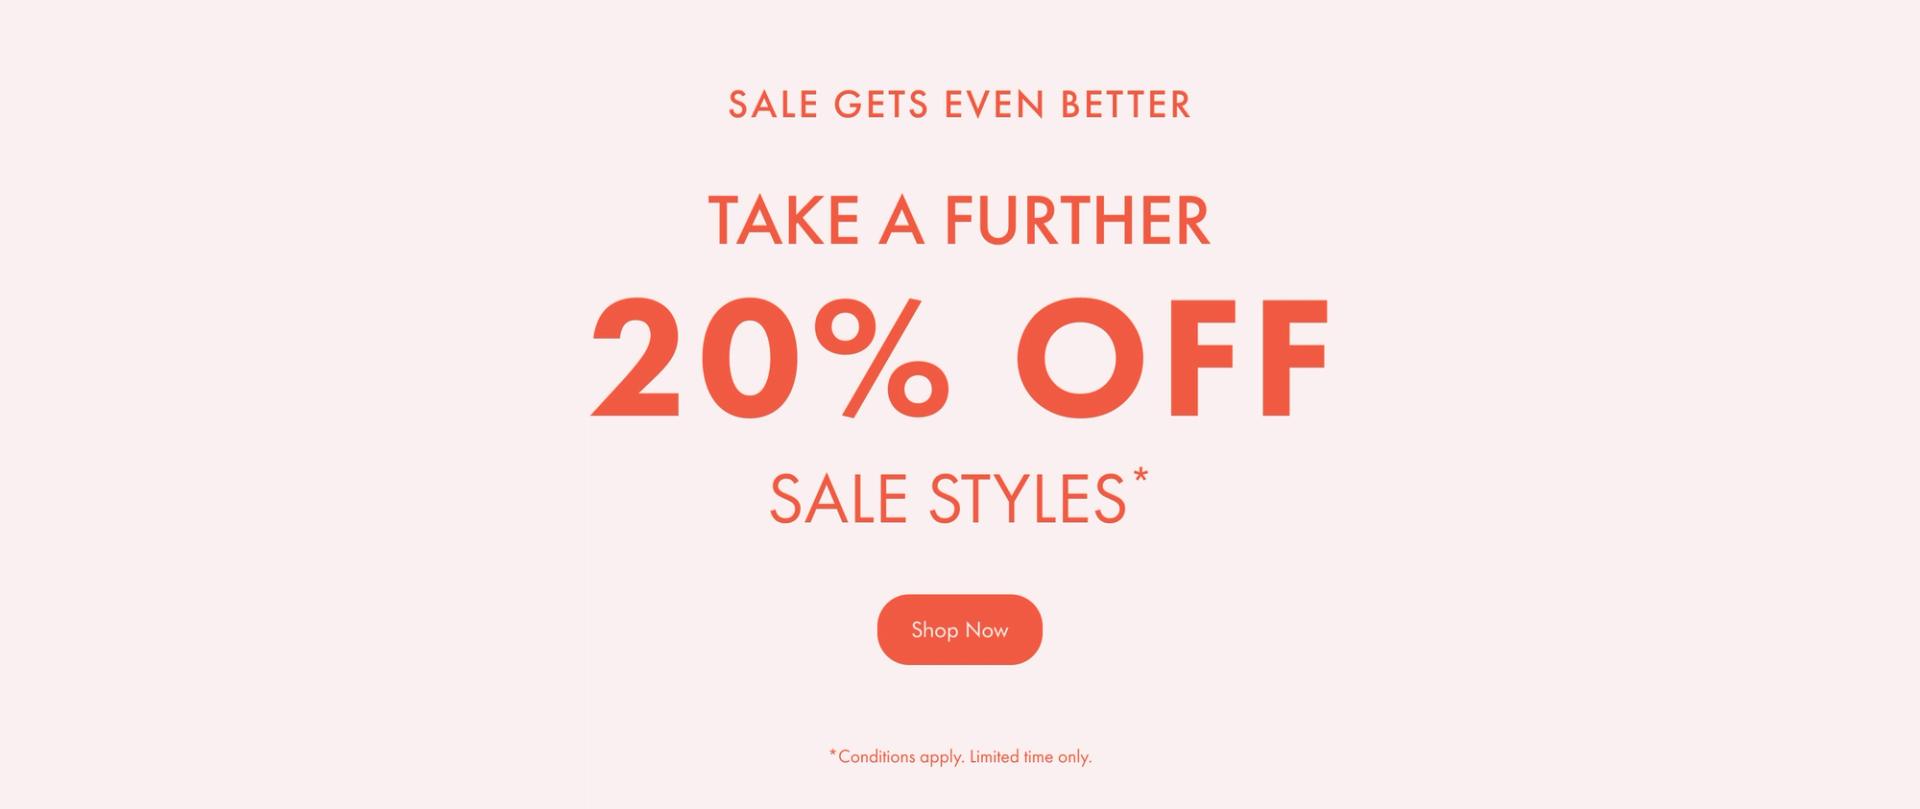 Take a further 20% Off Sale Styles